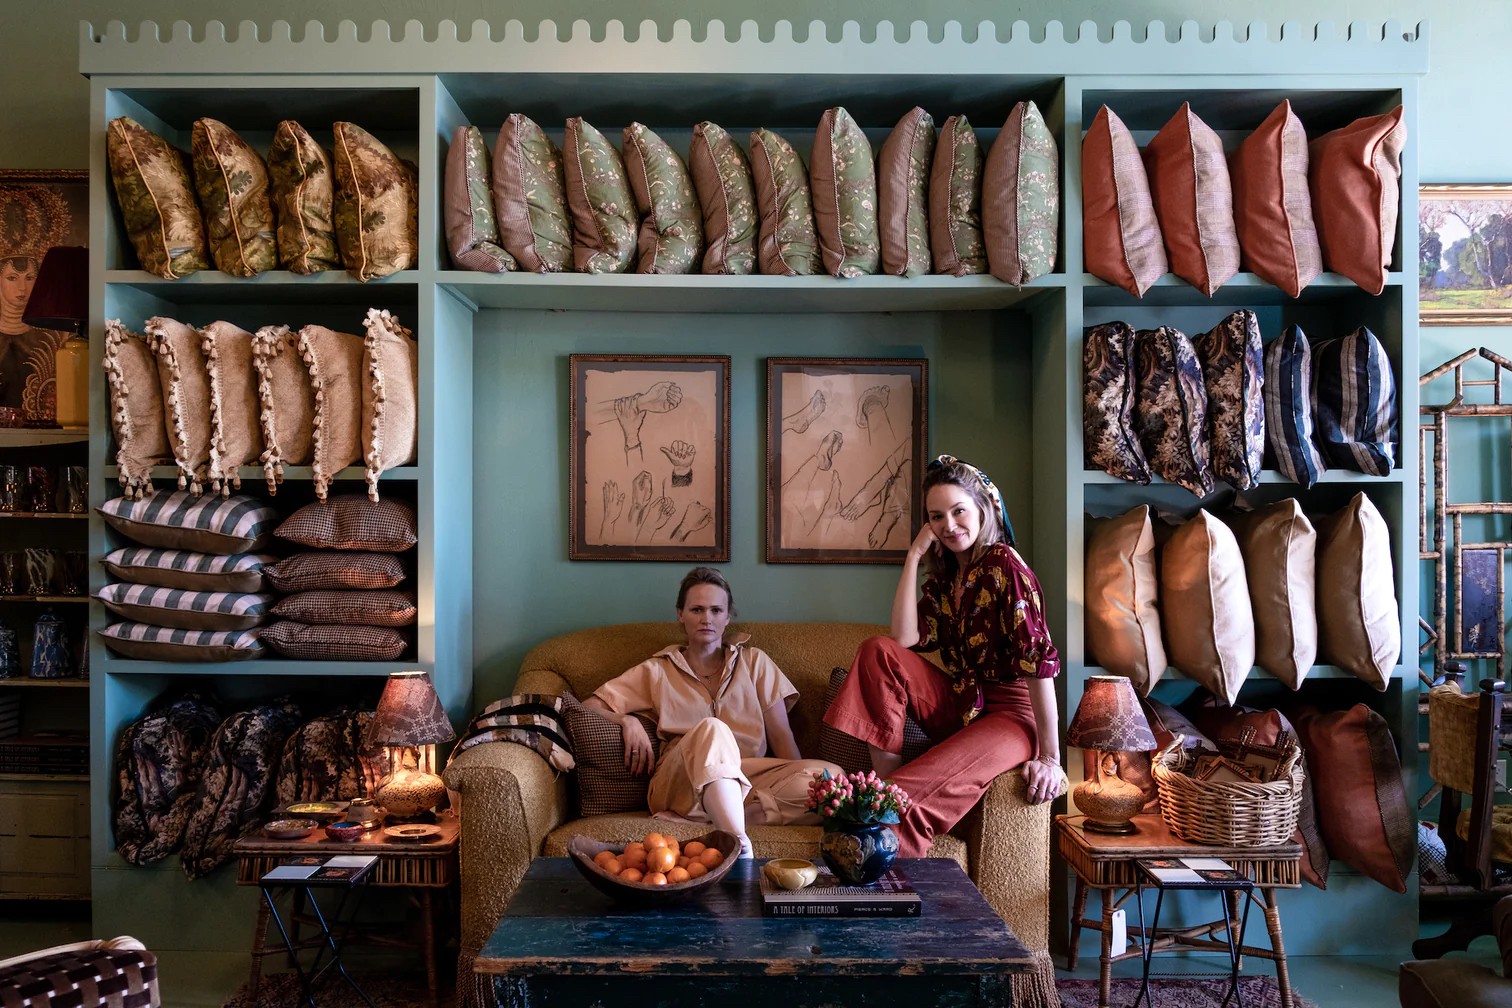 a man and a woman sitting on a couch in a room full of shoes